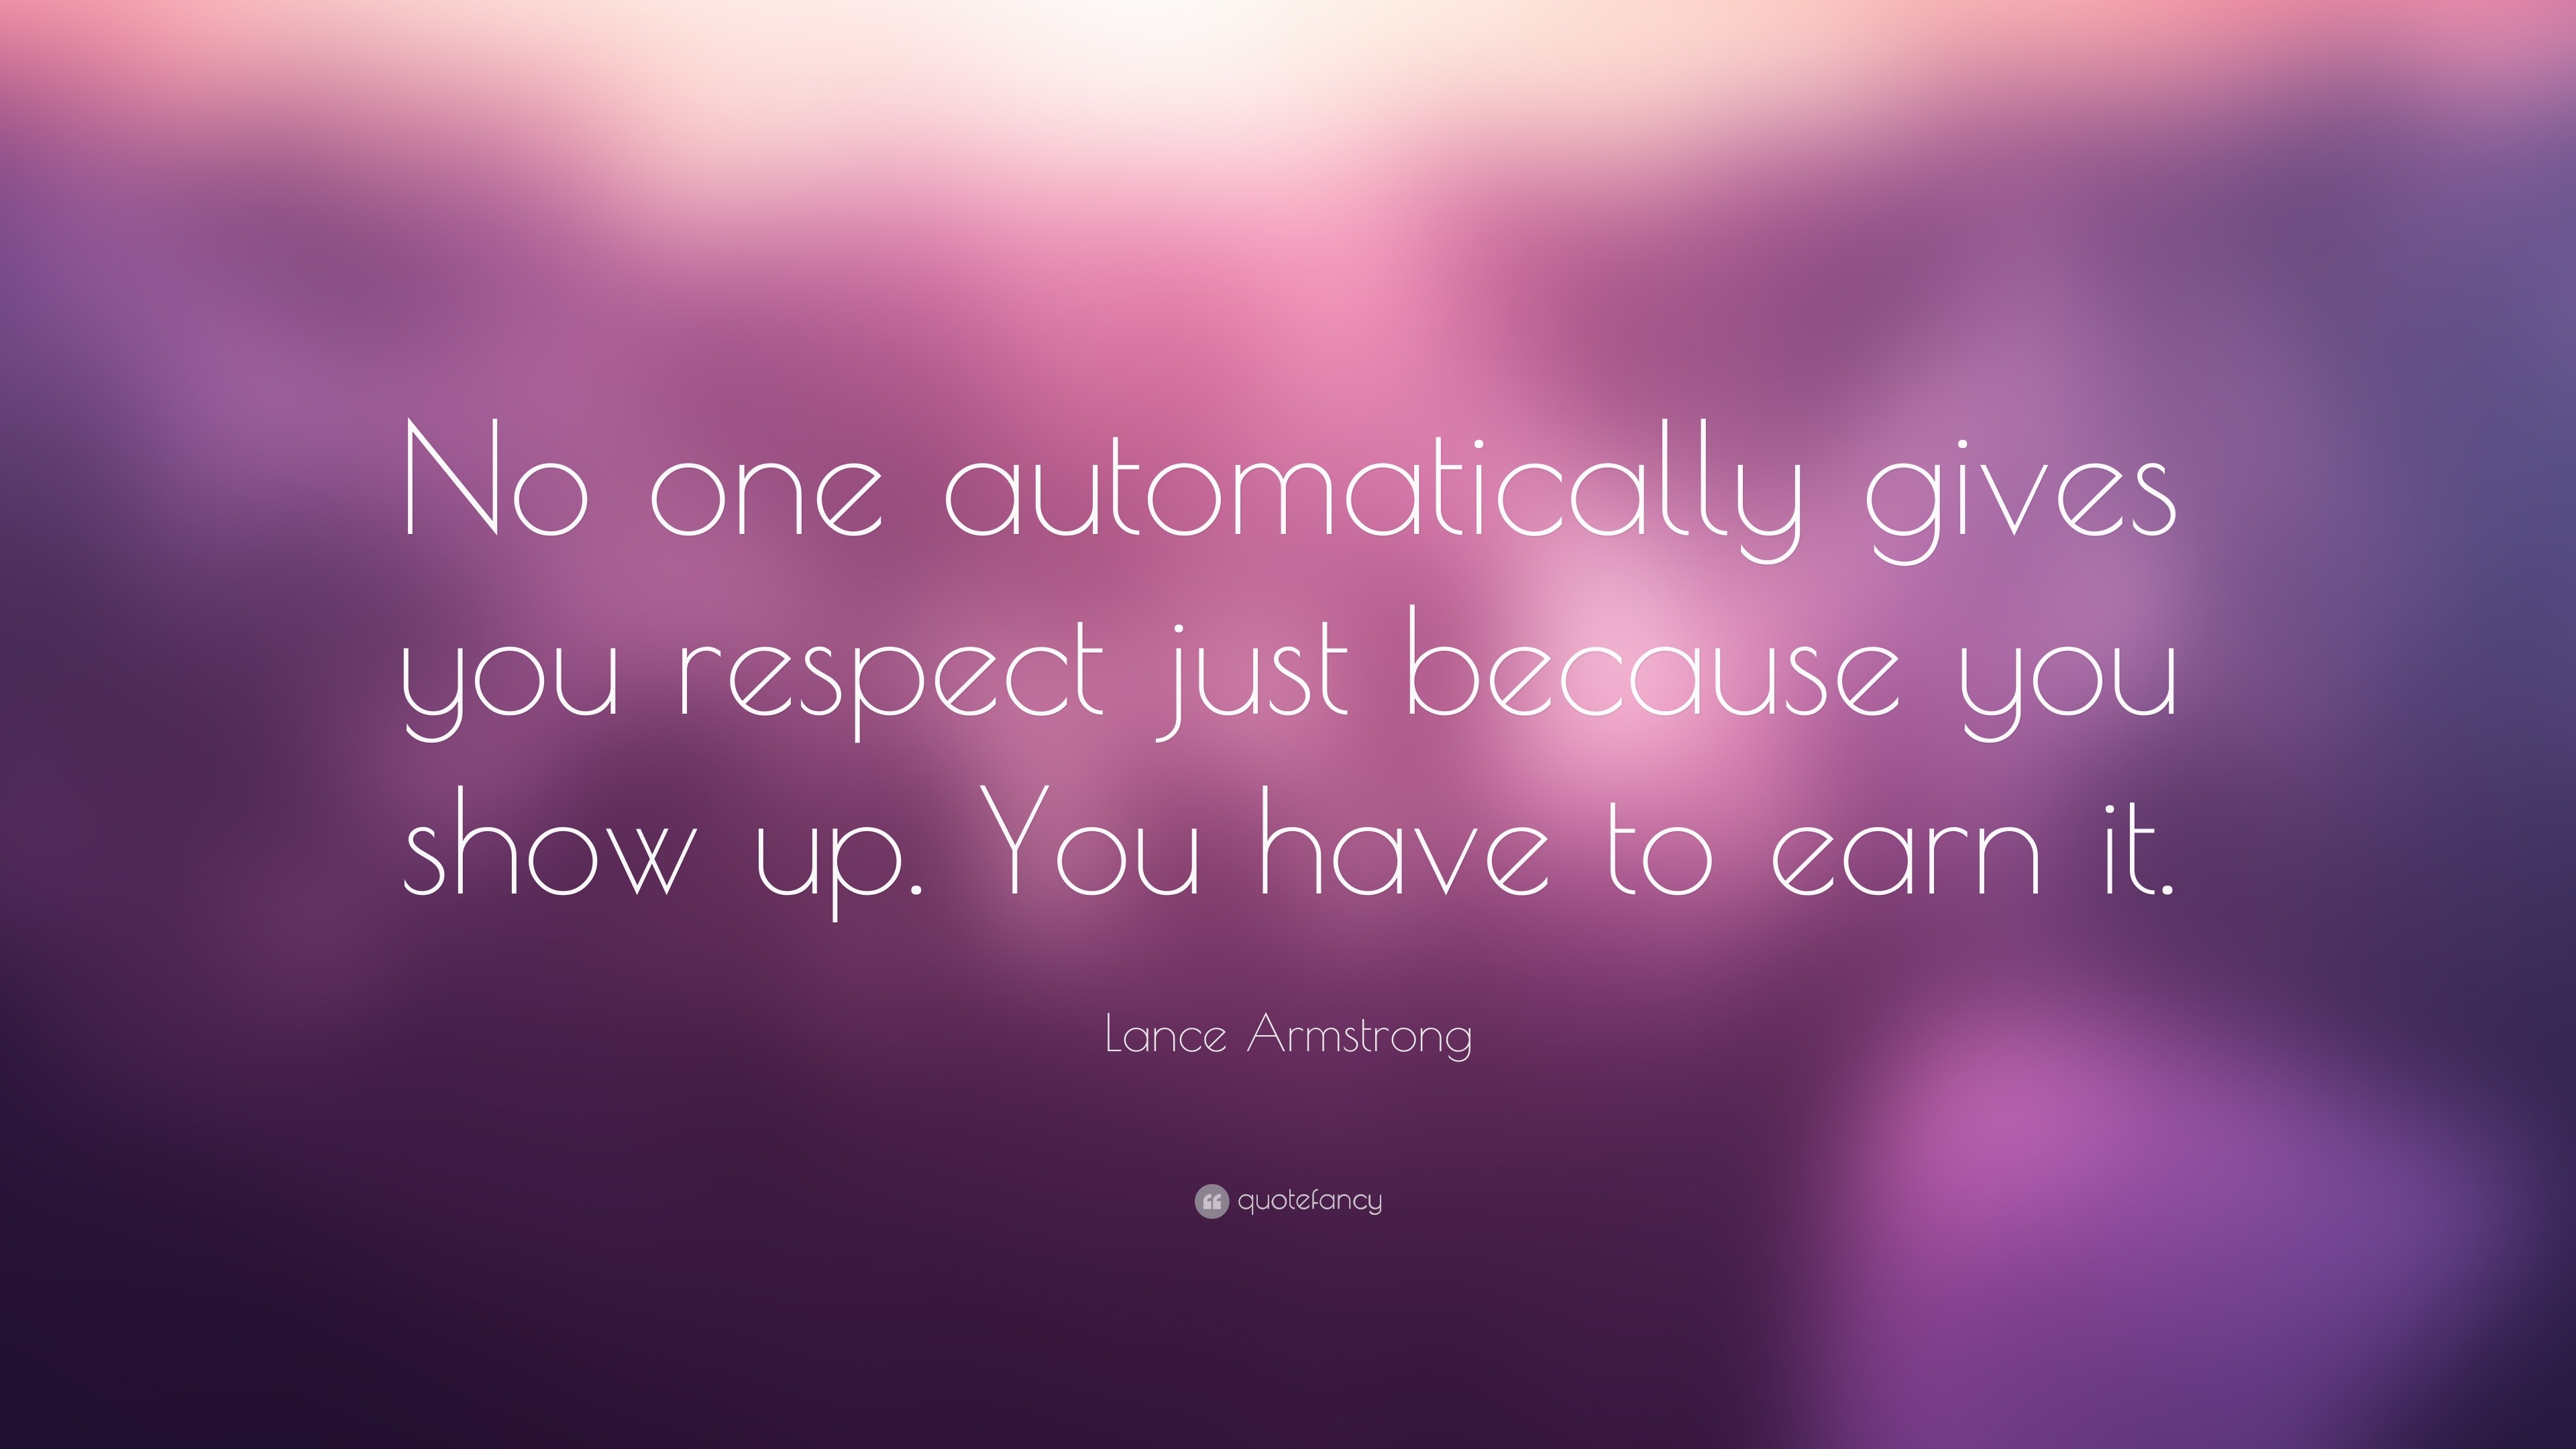 Lance Armstrong Quote: “No one automatically gives you respect just ...